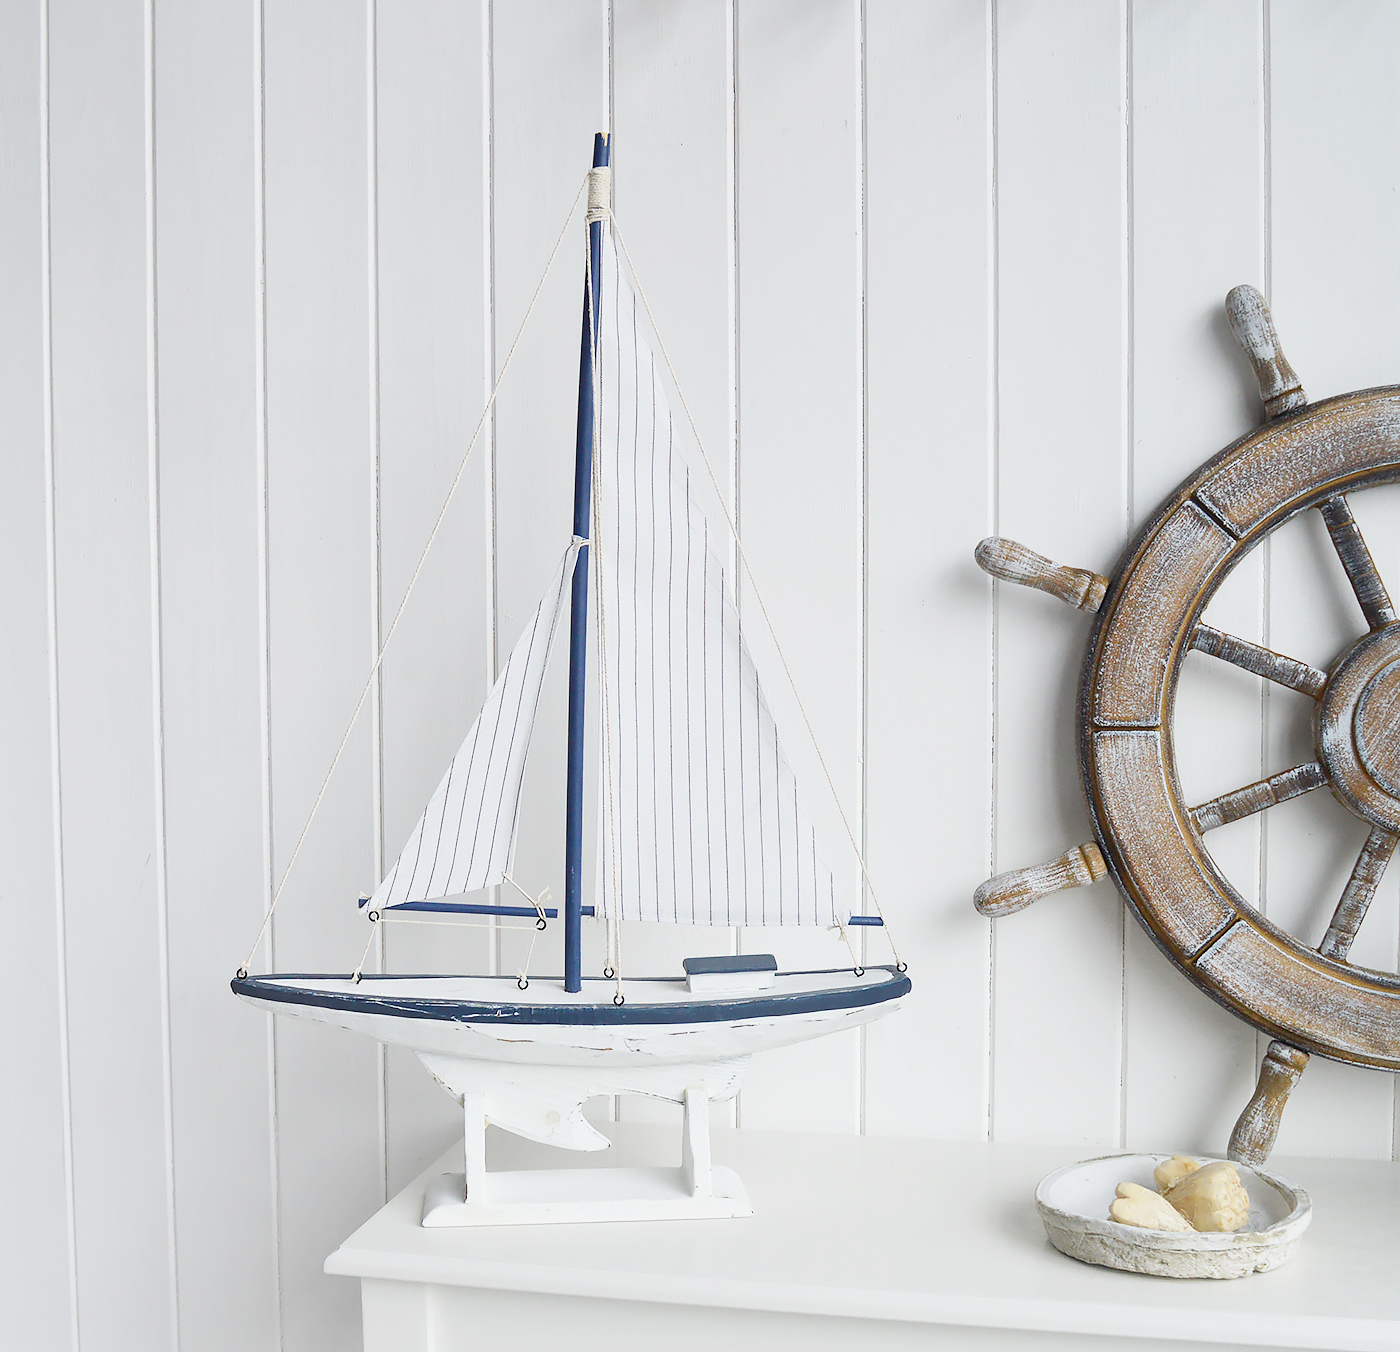 White Furniture and accessories for the home. A decorative white and blue yacht. Coastal Nautical Interior design Accessories for New England style homes and interiors